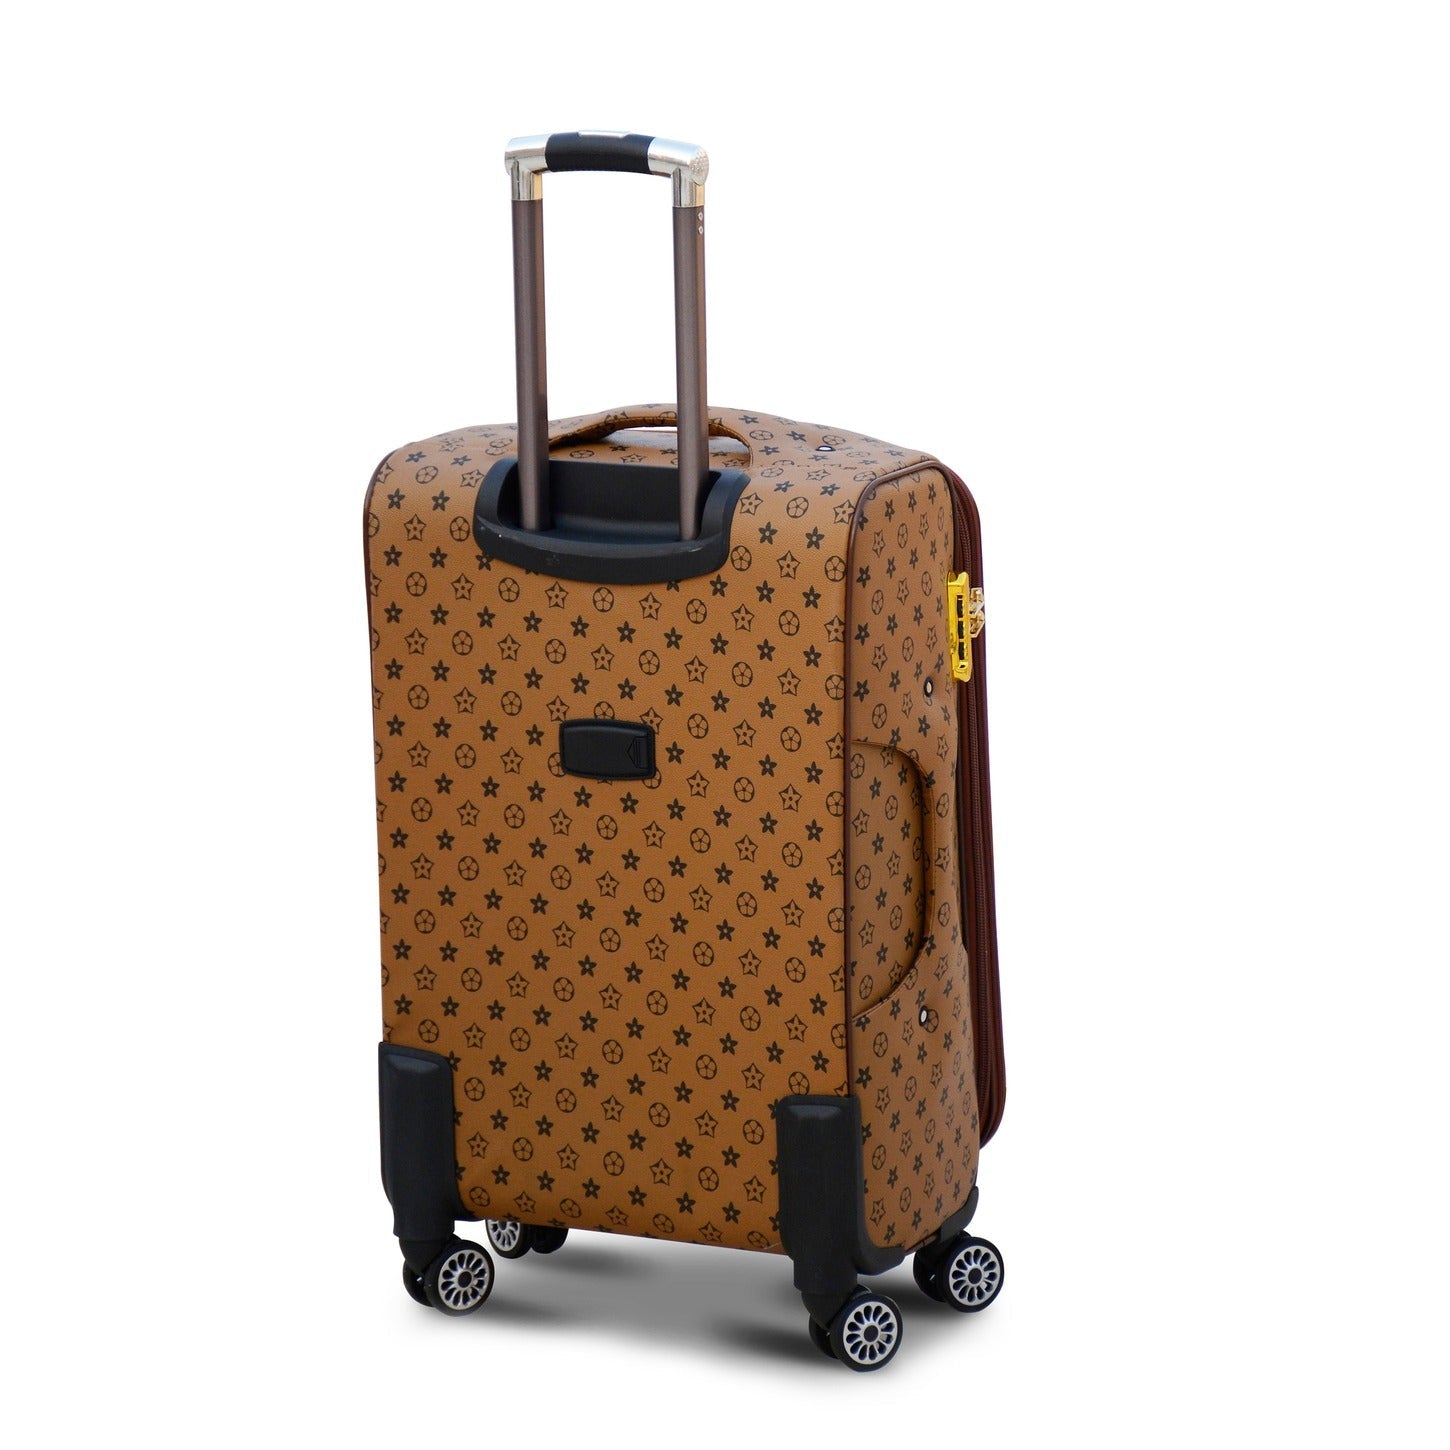 20" Light Brown Colour LVR PU Leather Luggage Lightweight Soft Material Carry On Trolley Bag with Spinner Wheel